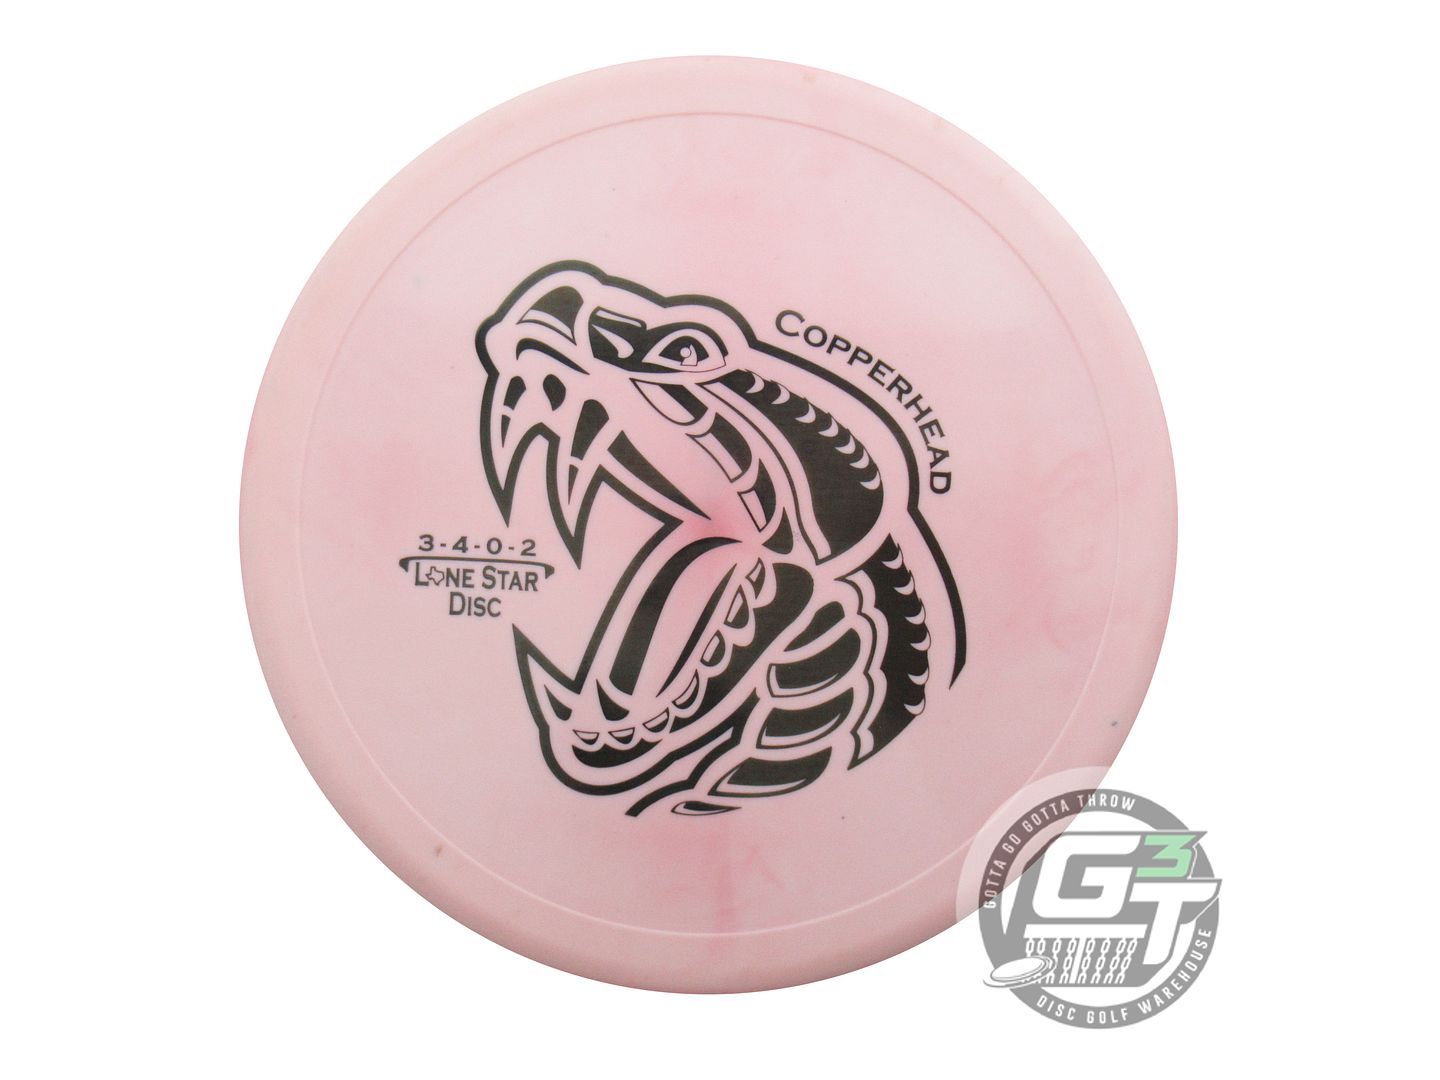 Lone Star Artist Series Lima Copperhead Putter Golf Disc (Individually Listed)